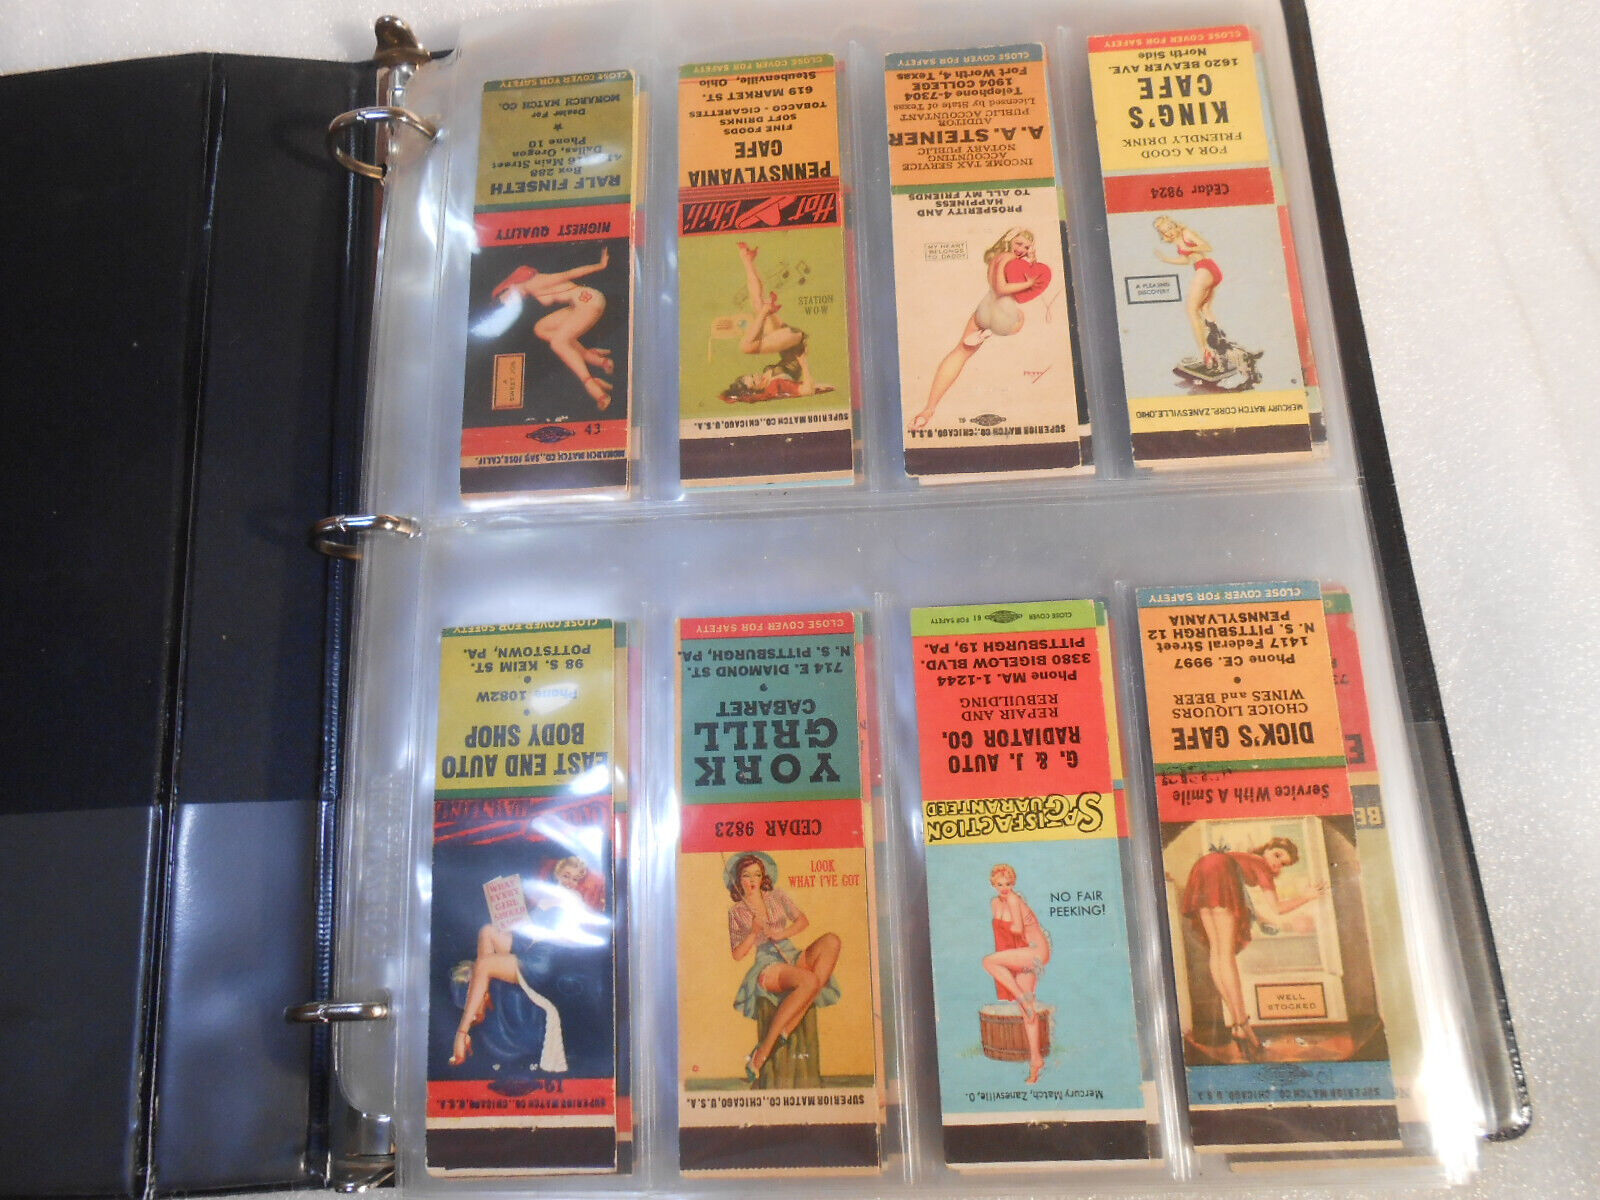 VINTAGE GIRLIE PIN UP MATCH COLLECTION  - 200+ Full Covers, Untruck,Near Mint .